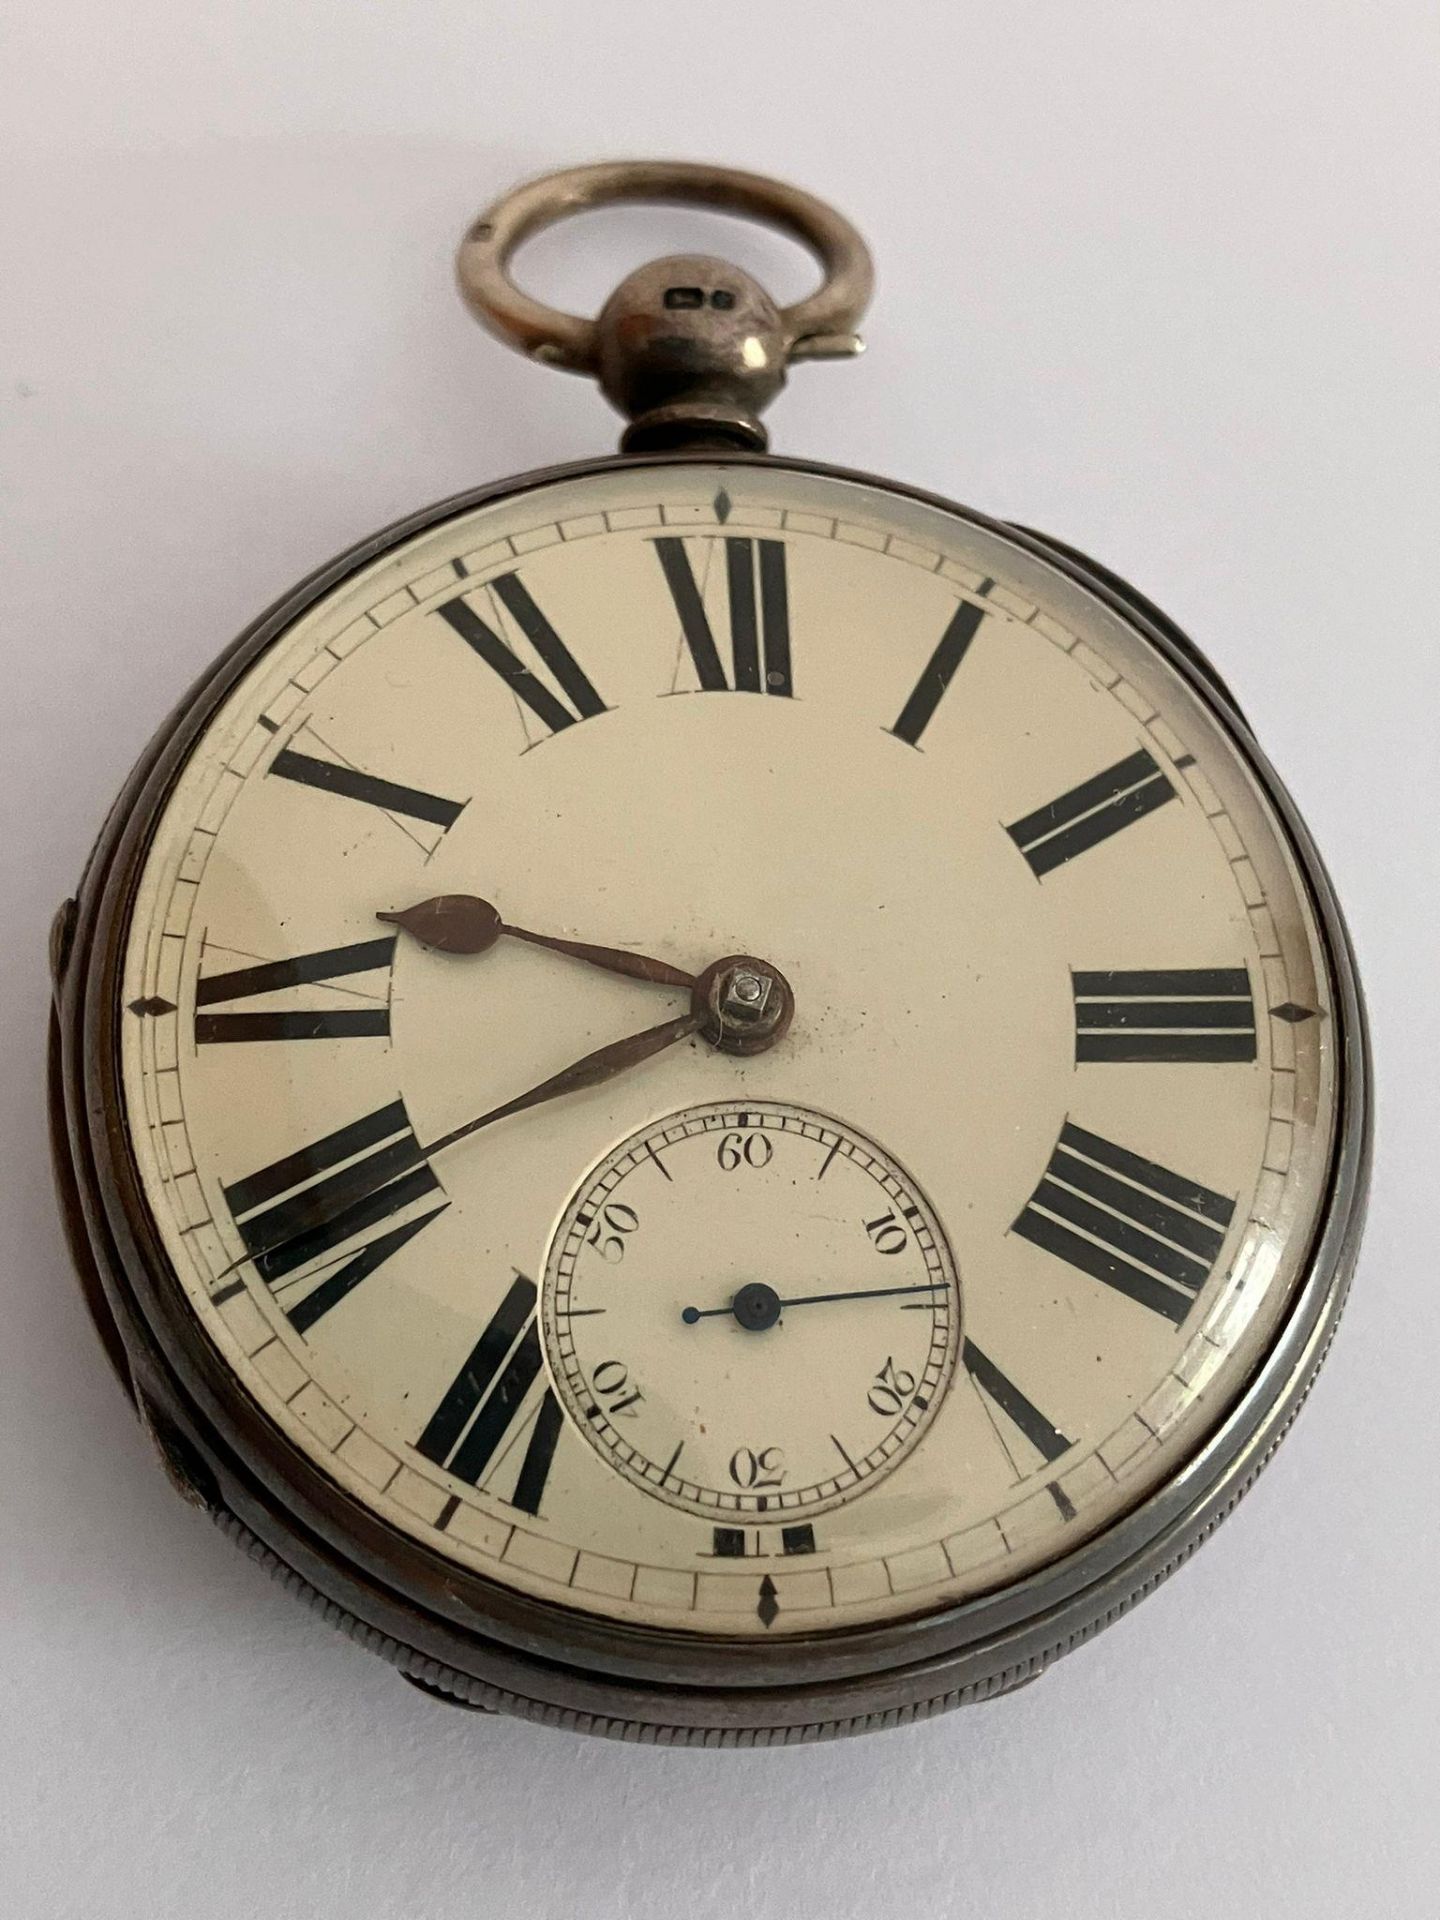 Antique SILVER POCKET WATCH with Silver Case hallmarked Robert John Pike, London 1873. Watch - Image 10 of 10